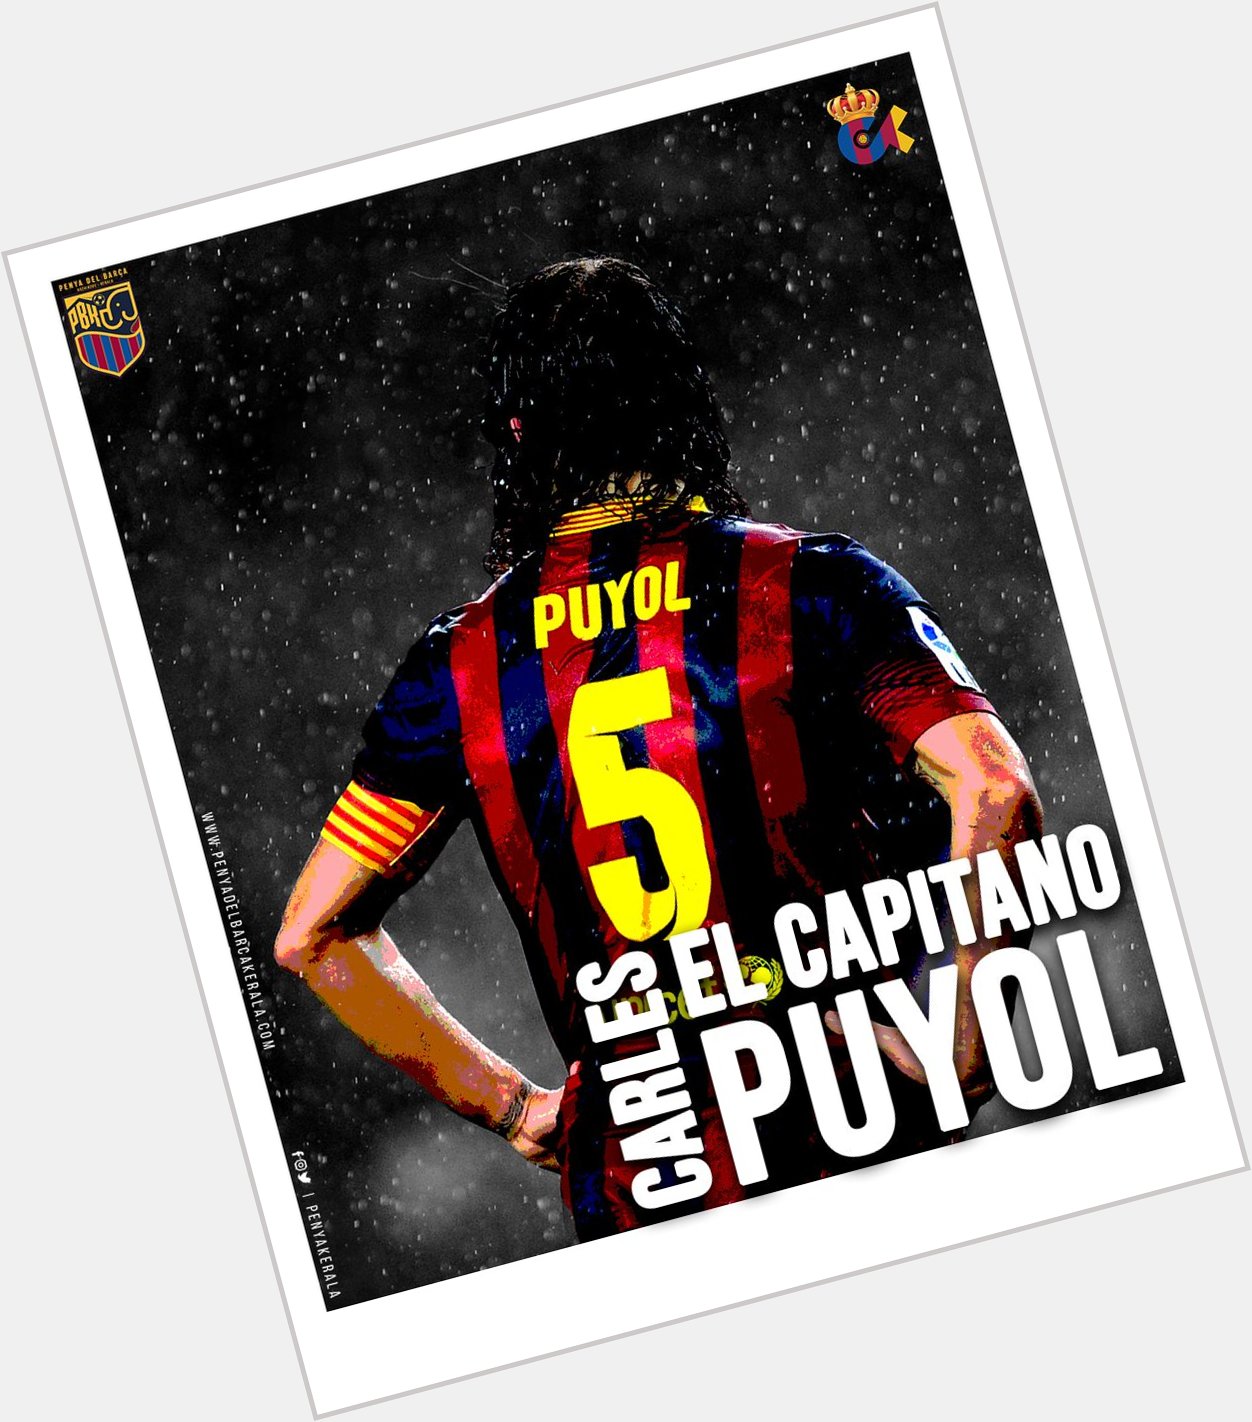 Defender,Leader and Icon.

Happy birthday to our one of the greatest captains of all-time,Carles Puyol   